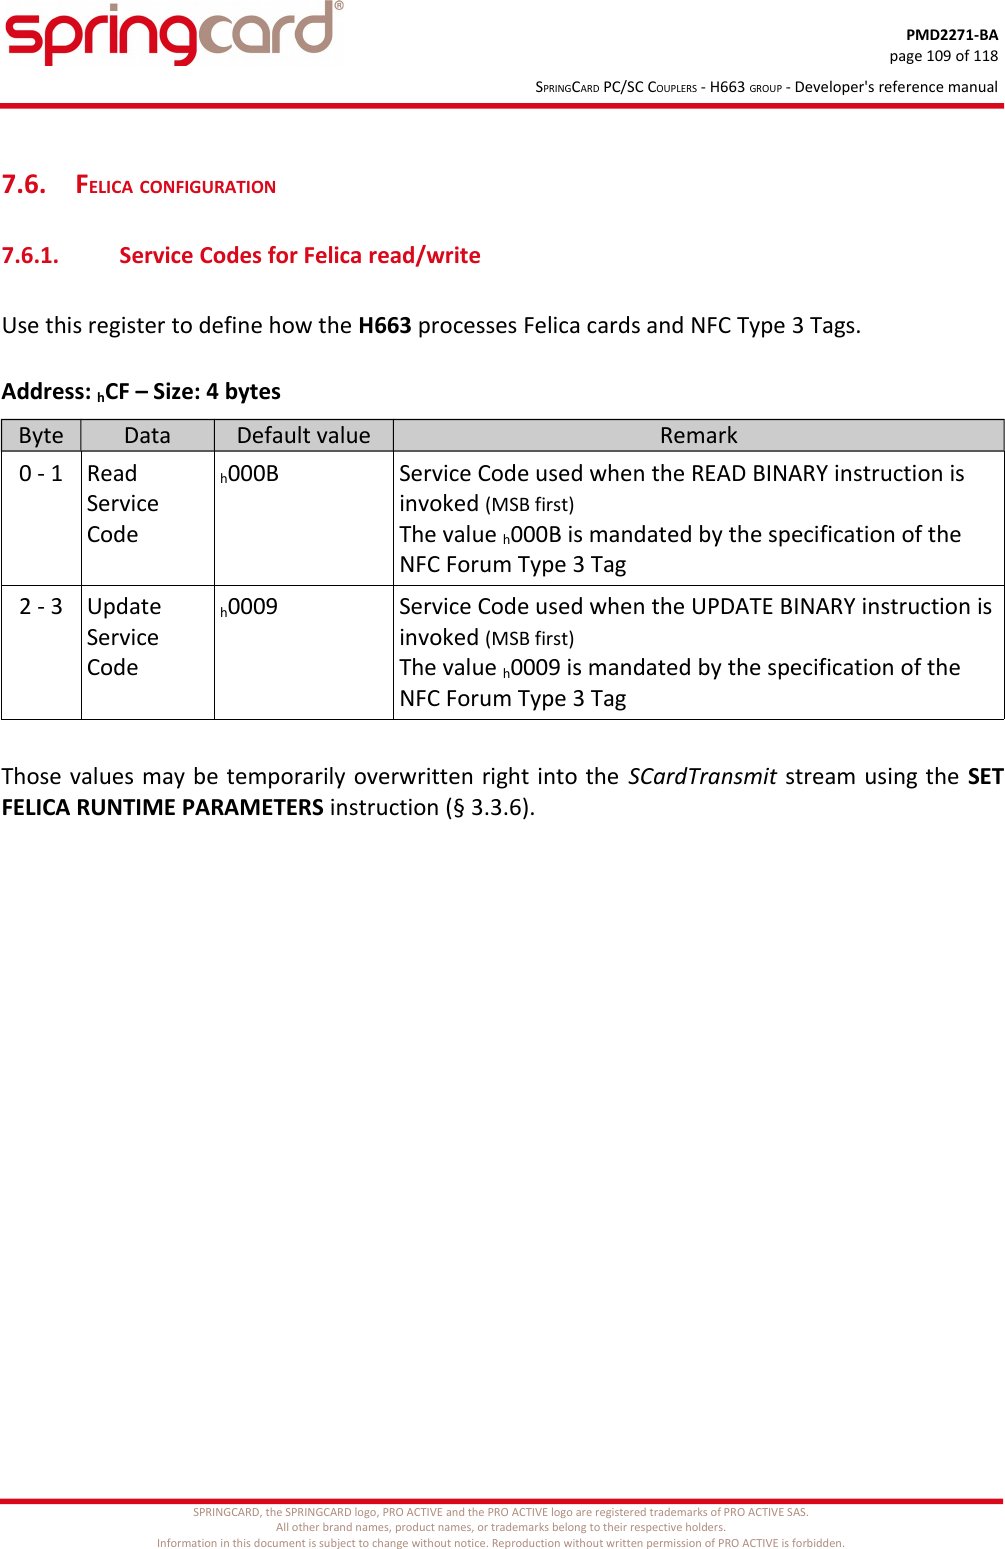 PMD2271-BApage 109 of 118SPRINGCARD PC/SC COUPLERS - H663 GROUP - Developer&apos;s reference manual7.6. FELICA CONFIGURATION7.6.1. Service Codes for Felica read/writeUse this register to define how the H663 processes Felica cards and NFC Type 3 Tags.Address: hCF – Size: 4 bytesByte Data Default value Remark0 - 1 Read Service Codeh000B Service Code used when the READ BINARY instruction is invoked (MSB first)The value h000B is mandated by the specification of the NFC Forum Type 3 Tag2 - 3 Update Service Codeh0009 Service Code used when the UPDATE BINARY instruction isinvoked (MSB first)The value h0009 is mandated by the specification of the NFC Forum Type 3 TagThose values may be temporarily overwritten right into the SCardTransmit stream using the SETFELICA RUNTIME PARAMETERS instruction (§ 3.3.6).SPRINGCARD, the SPRINGCARD logo, PRO ACTIVE and the PRO ACTIVE logo are registered trademarks of PRO ACTIVE SAS.All other brand names, product names, or trademarks belong to their respective holders.Information in this document is subject to change without notice. Reproduction without written permission of PRO ACTIVE is forbidden.